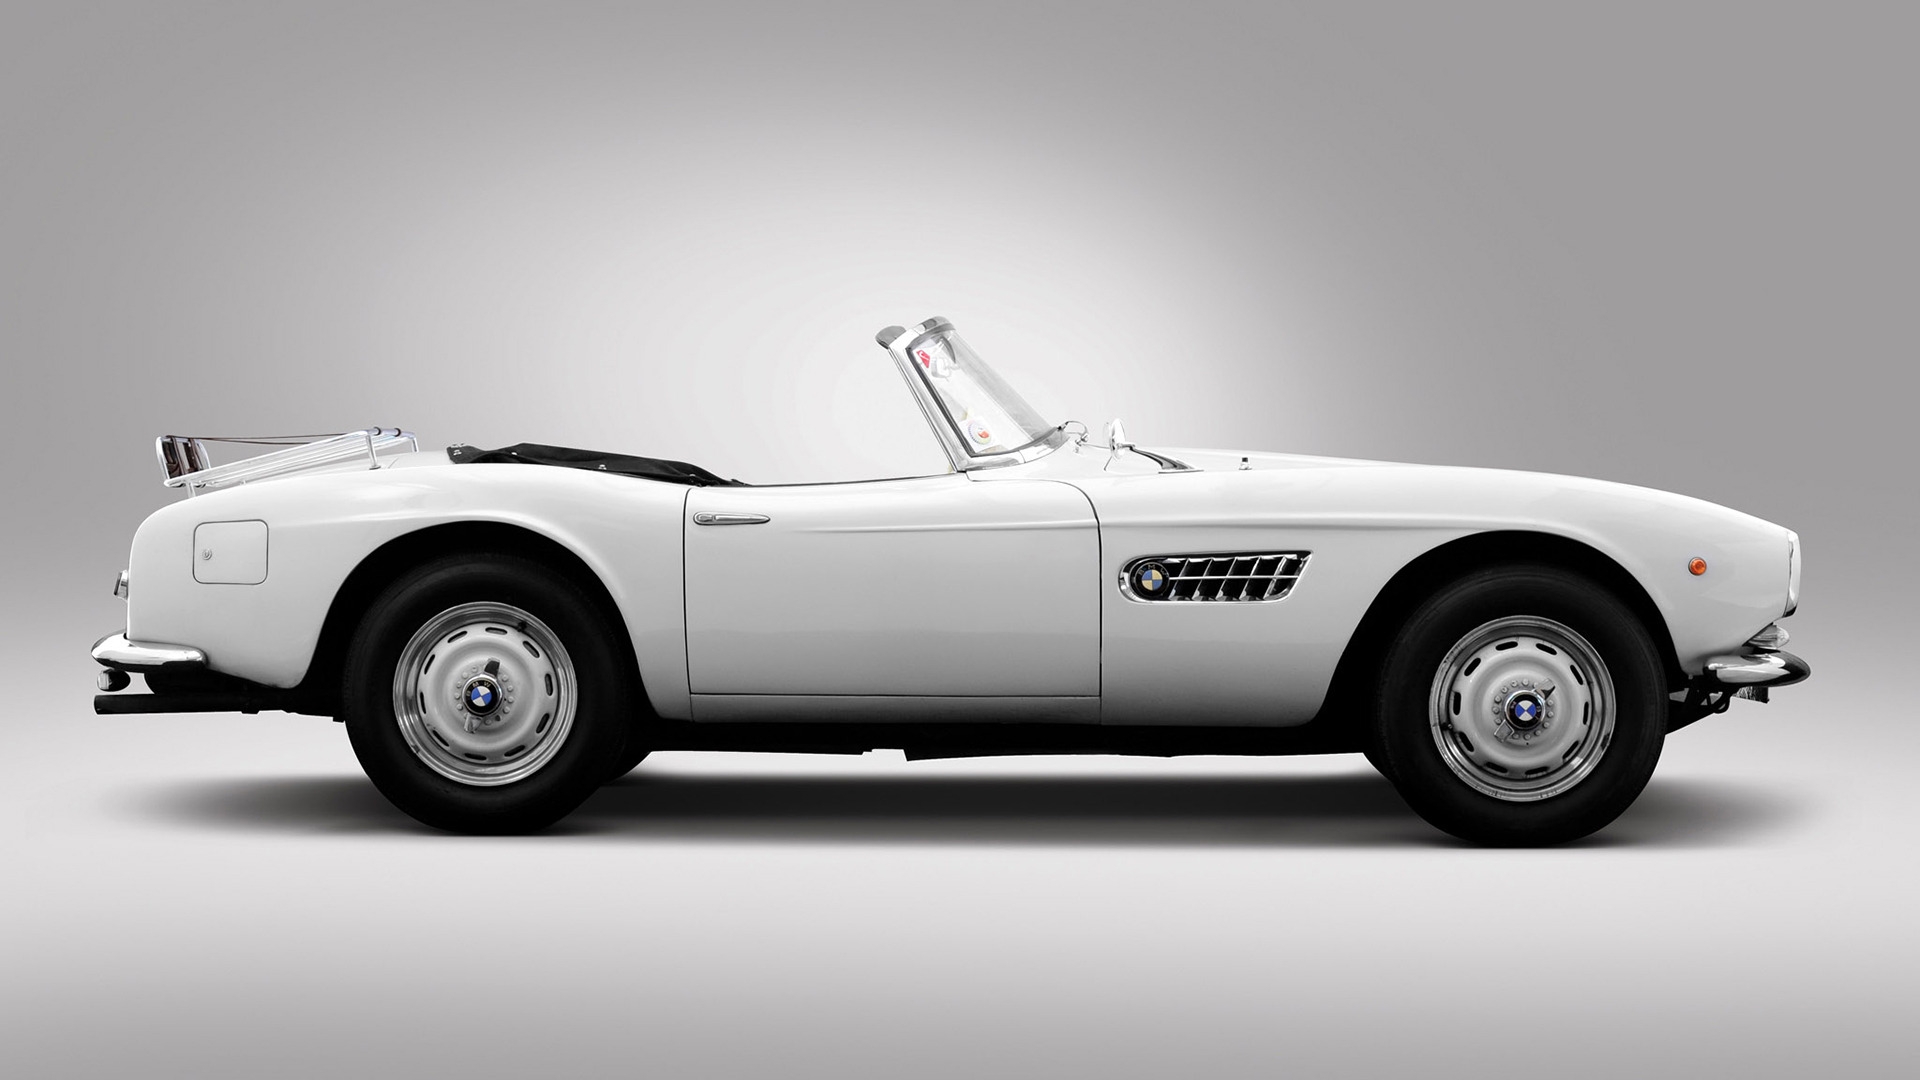 BMW 507 1957 for 1920 x 1080 HDTV 1080p resolution